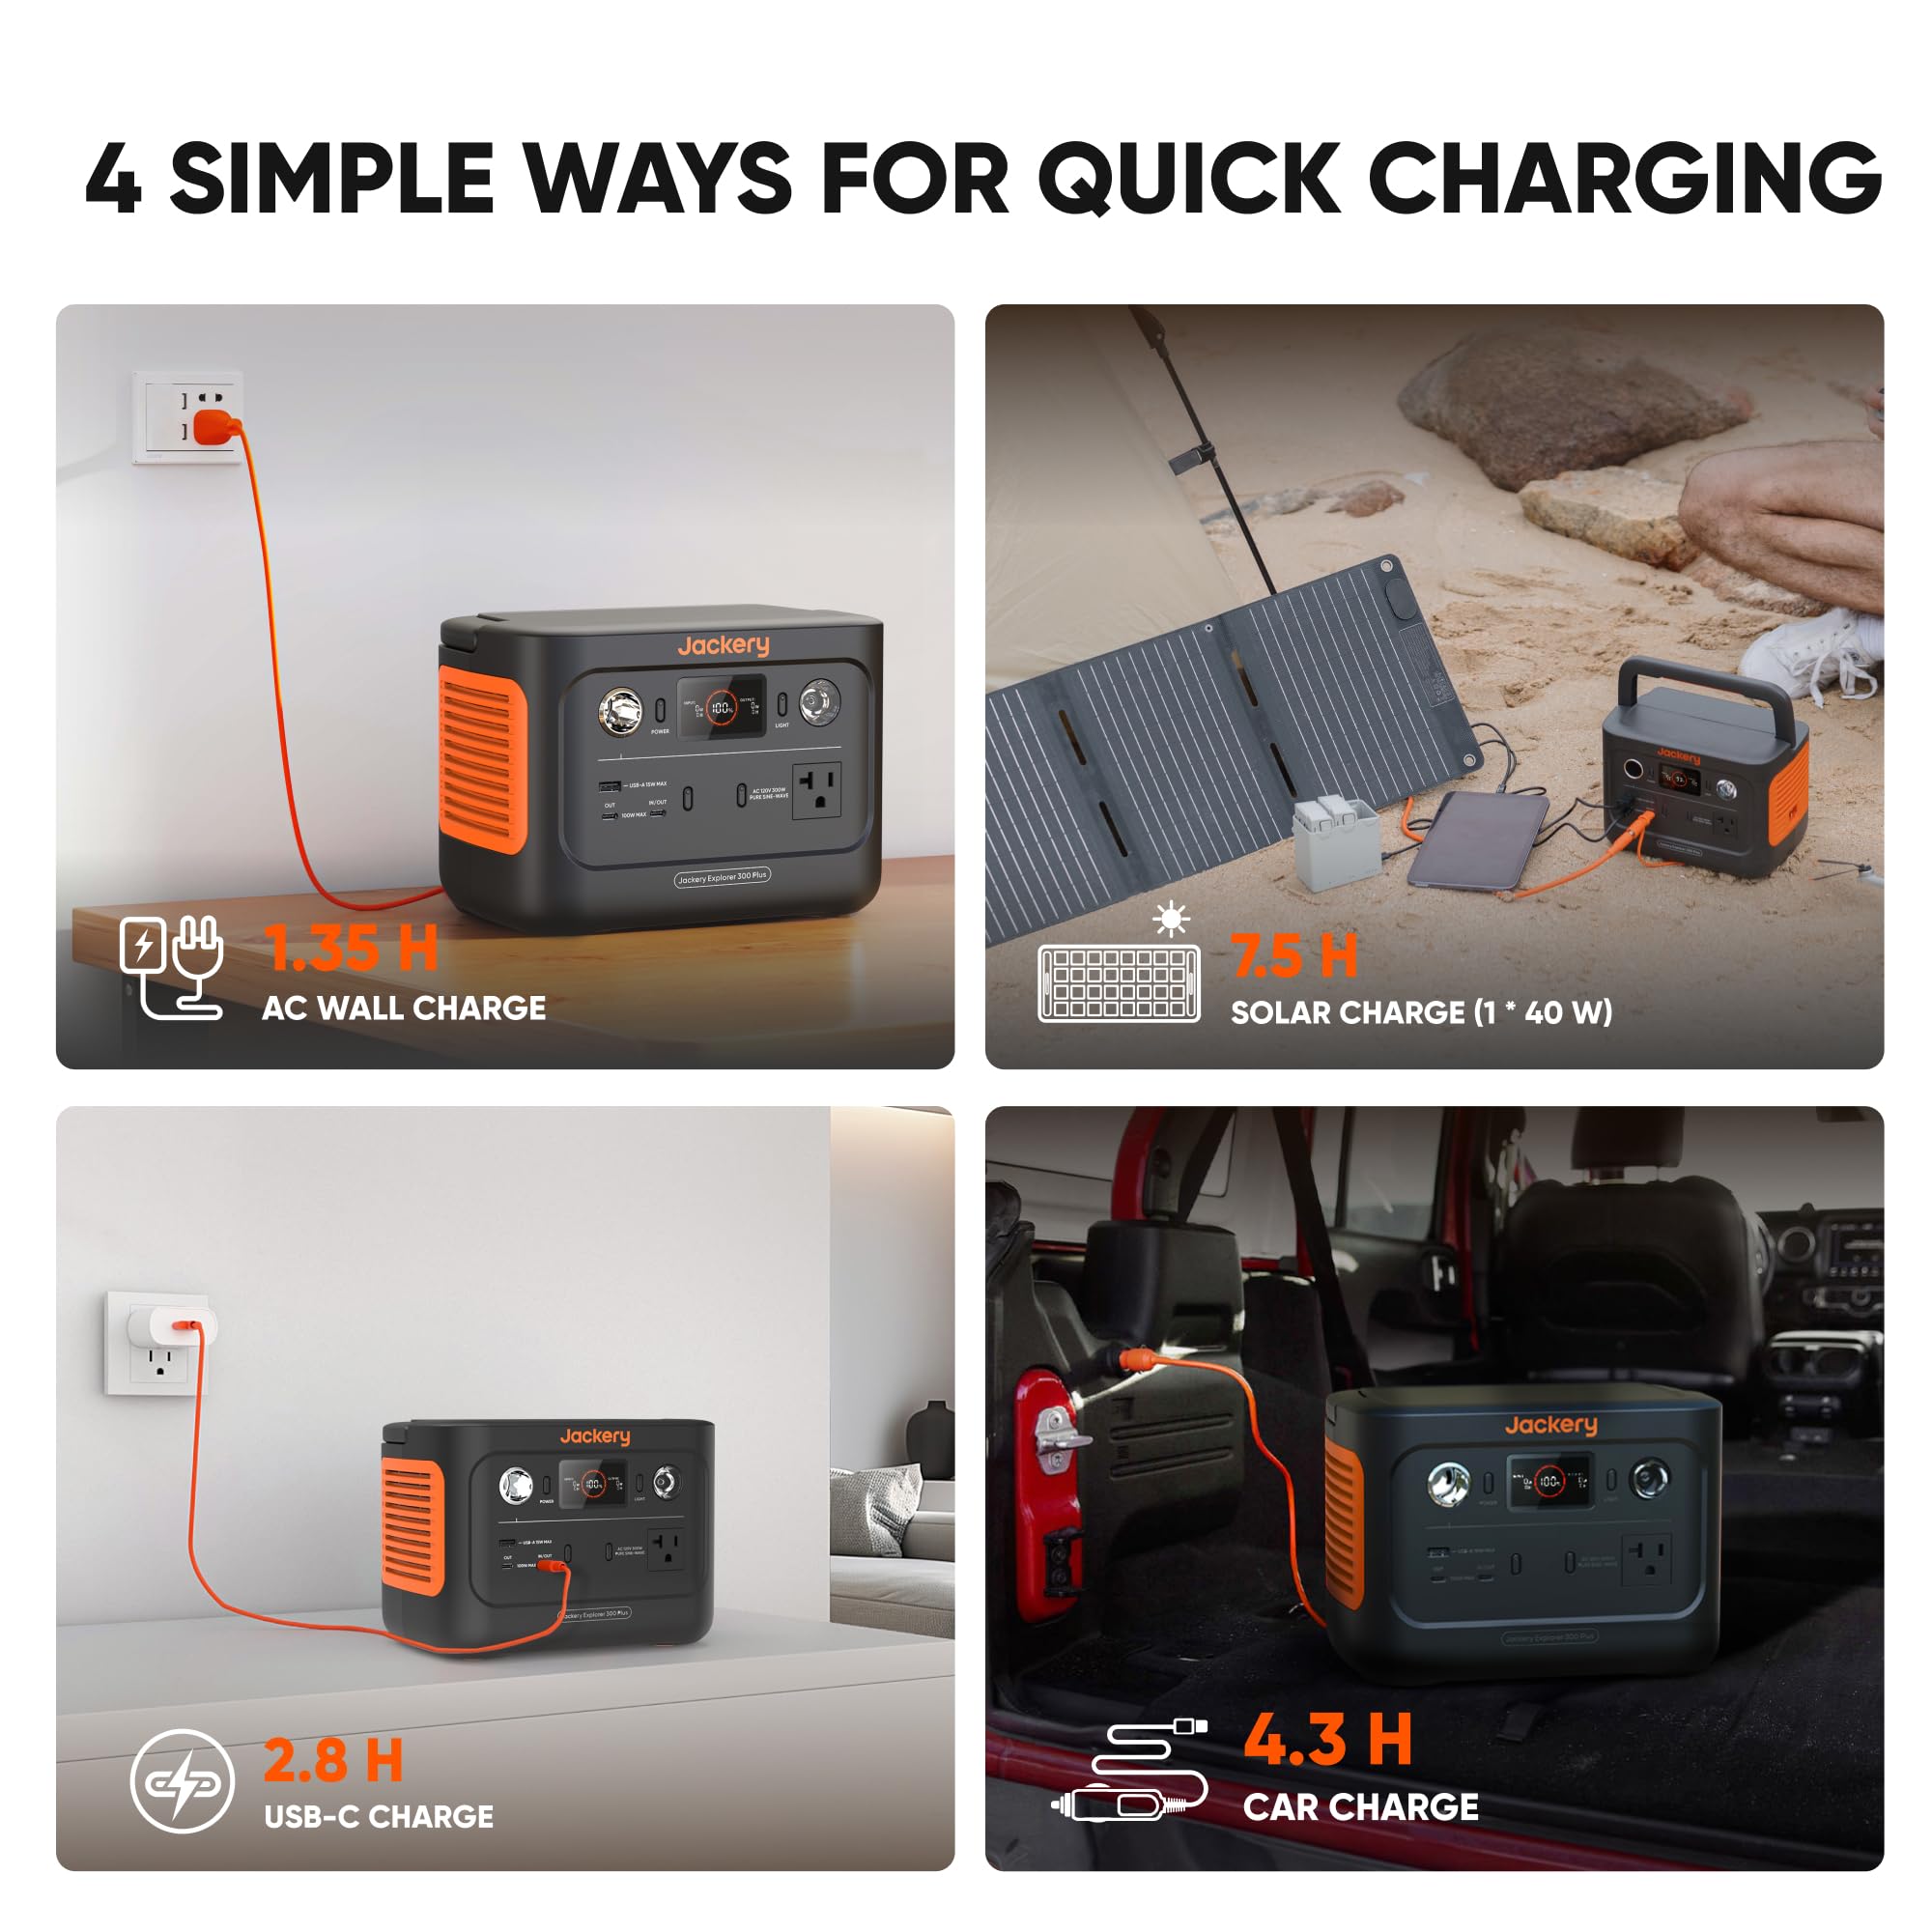 Jackery Explorer 300 Plus Portable Power Station, 288Wh Backup LiFePO4 Battery, 300W AC Outlet, 3.75 KG Solar Generator for RV, Outdoors, Camping, Traveling, and Emergencies (Solar Panel Optional)